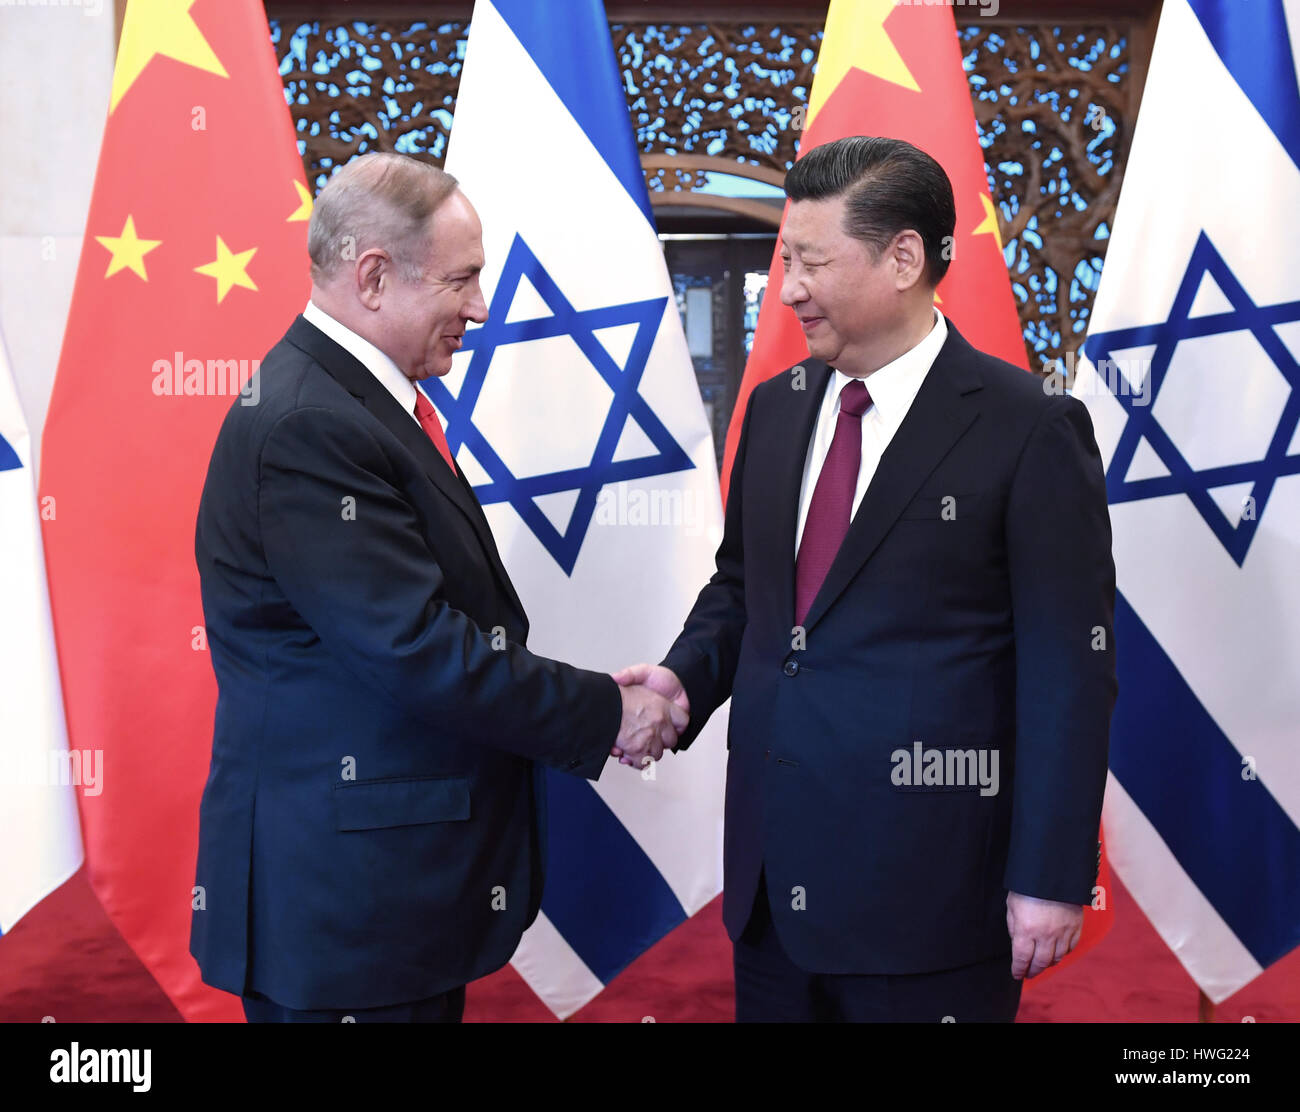 Beijing, China. 21st Mar, 2017. Chinese President Xi Jinping (R) meets with Israeli Prime Minister Benjamin Netanyahu in Beijing, capital of China, March 21, 2017. Credit: Rao Ainmin/Xinhua/Alamy Live News Stock Photo